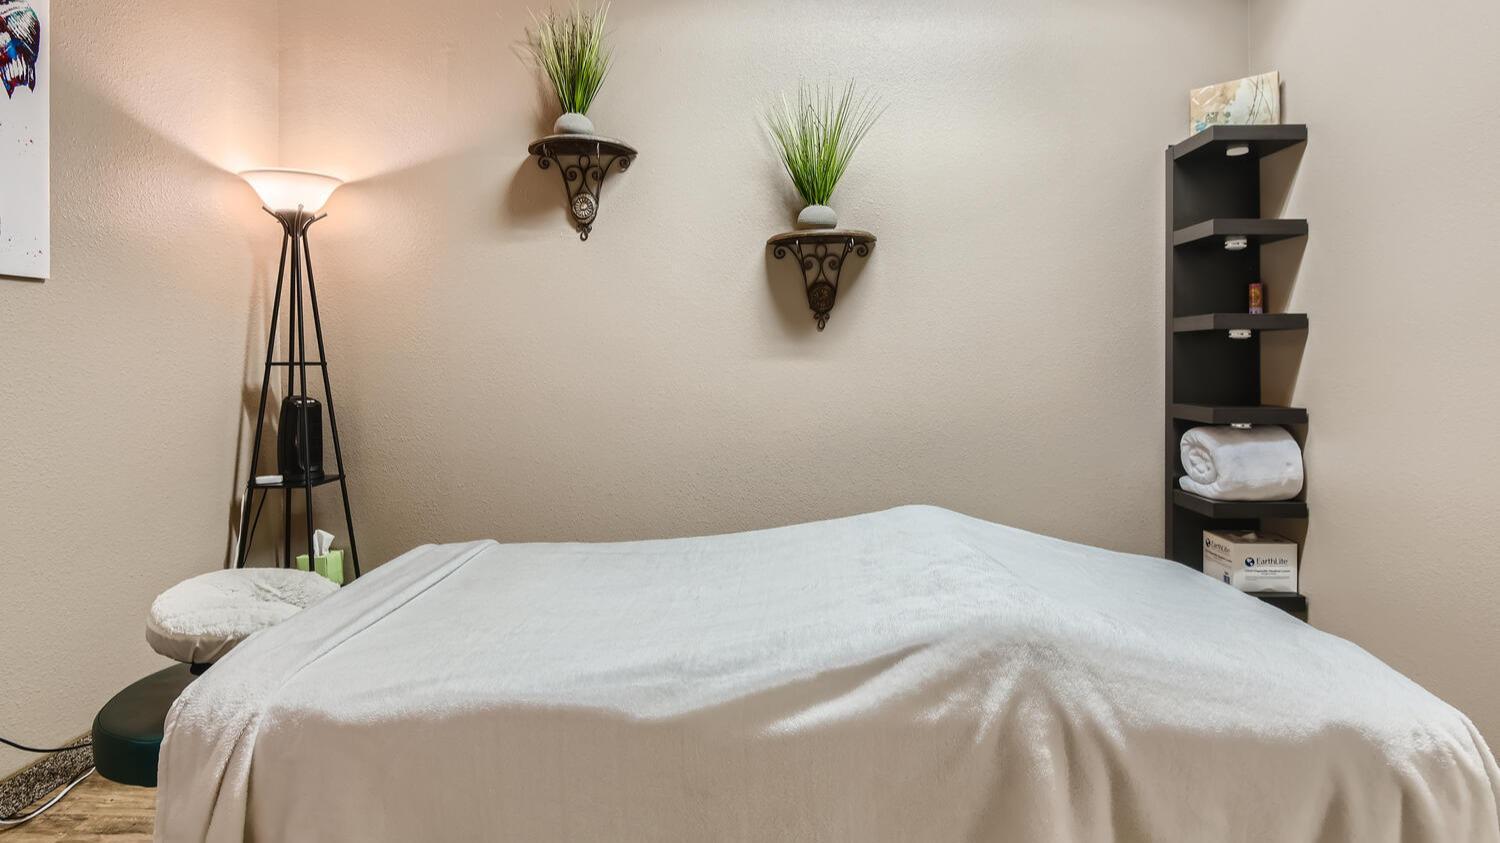 Our trained therapists will tailor the session according to your individual needs so that you can receive maximum benefit from one of our healing massages. You can expect to leave feeling deeply relaxed, rejuvenated, and restored.